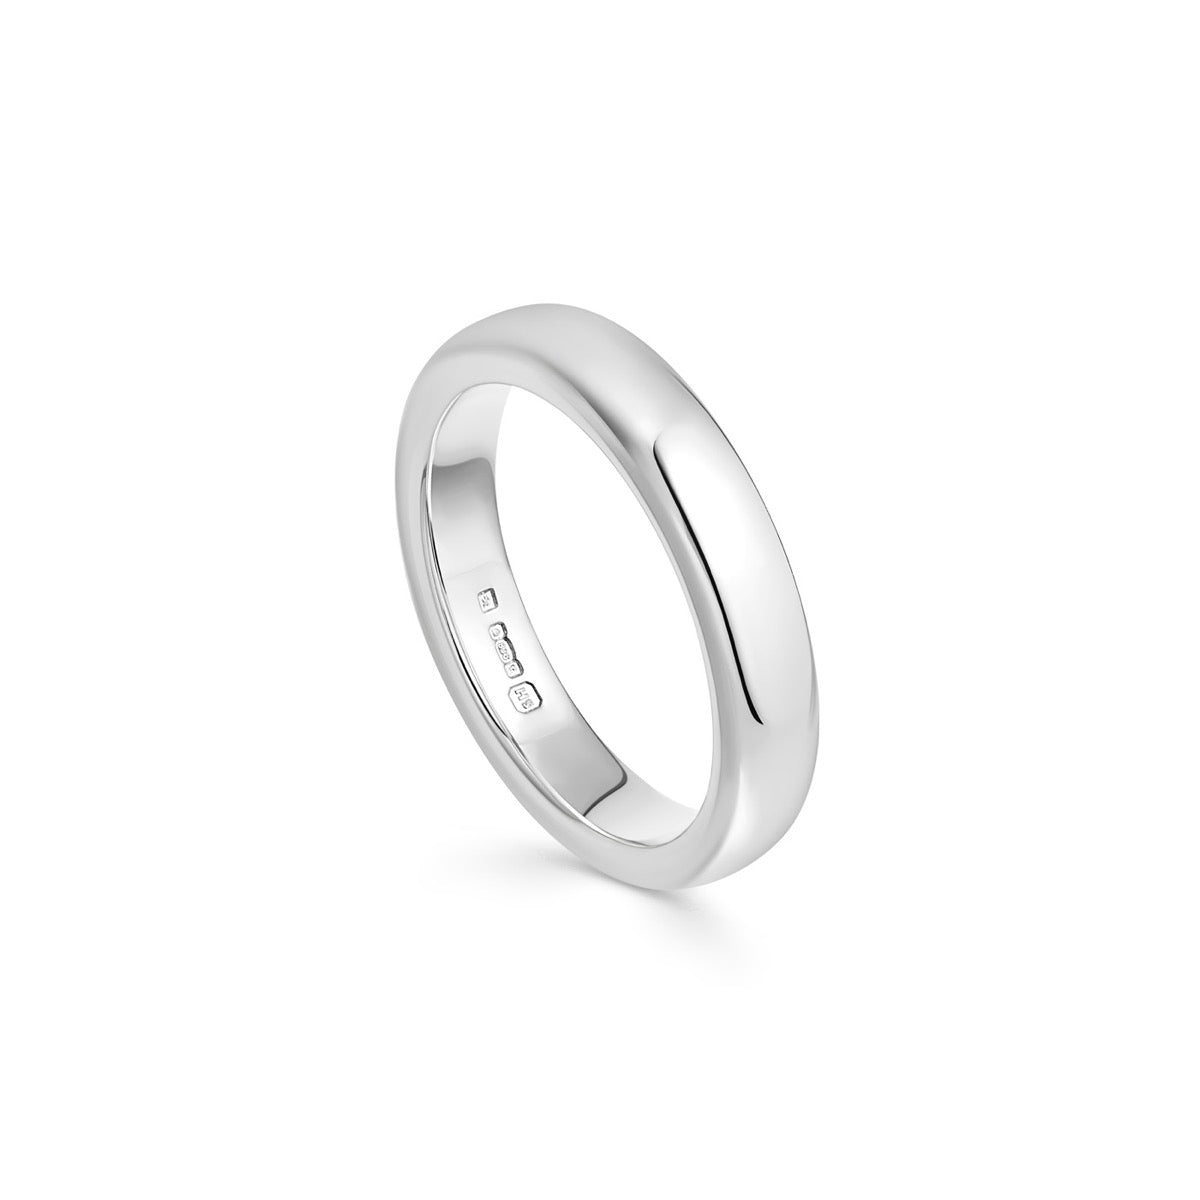 Deluxe Sterling Silver Court Ring - 4mm